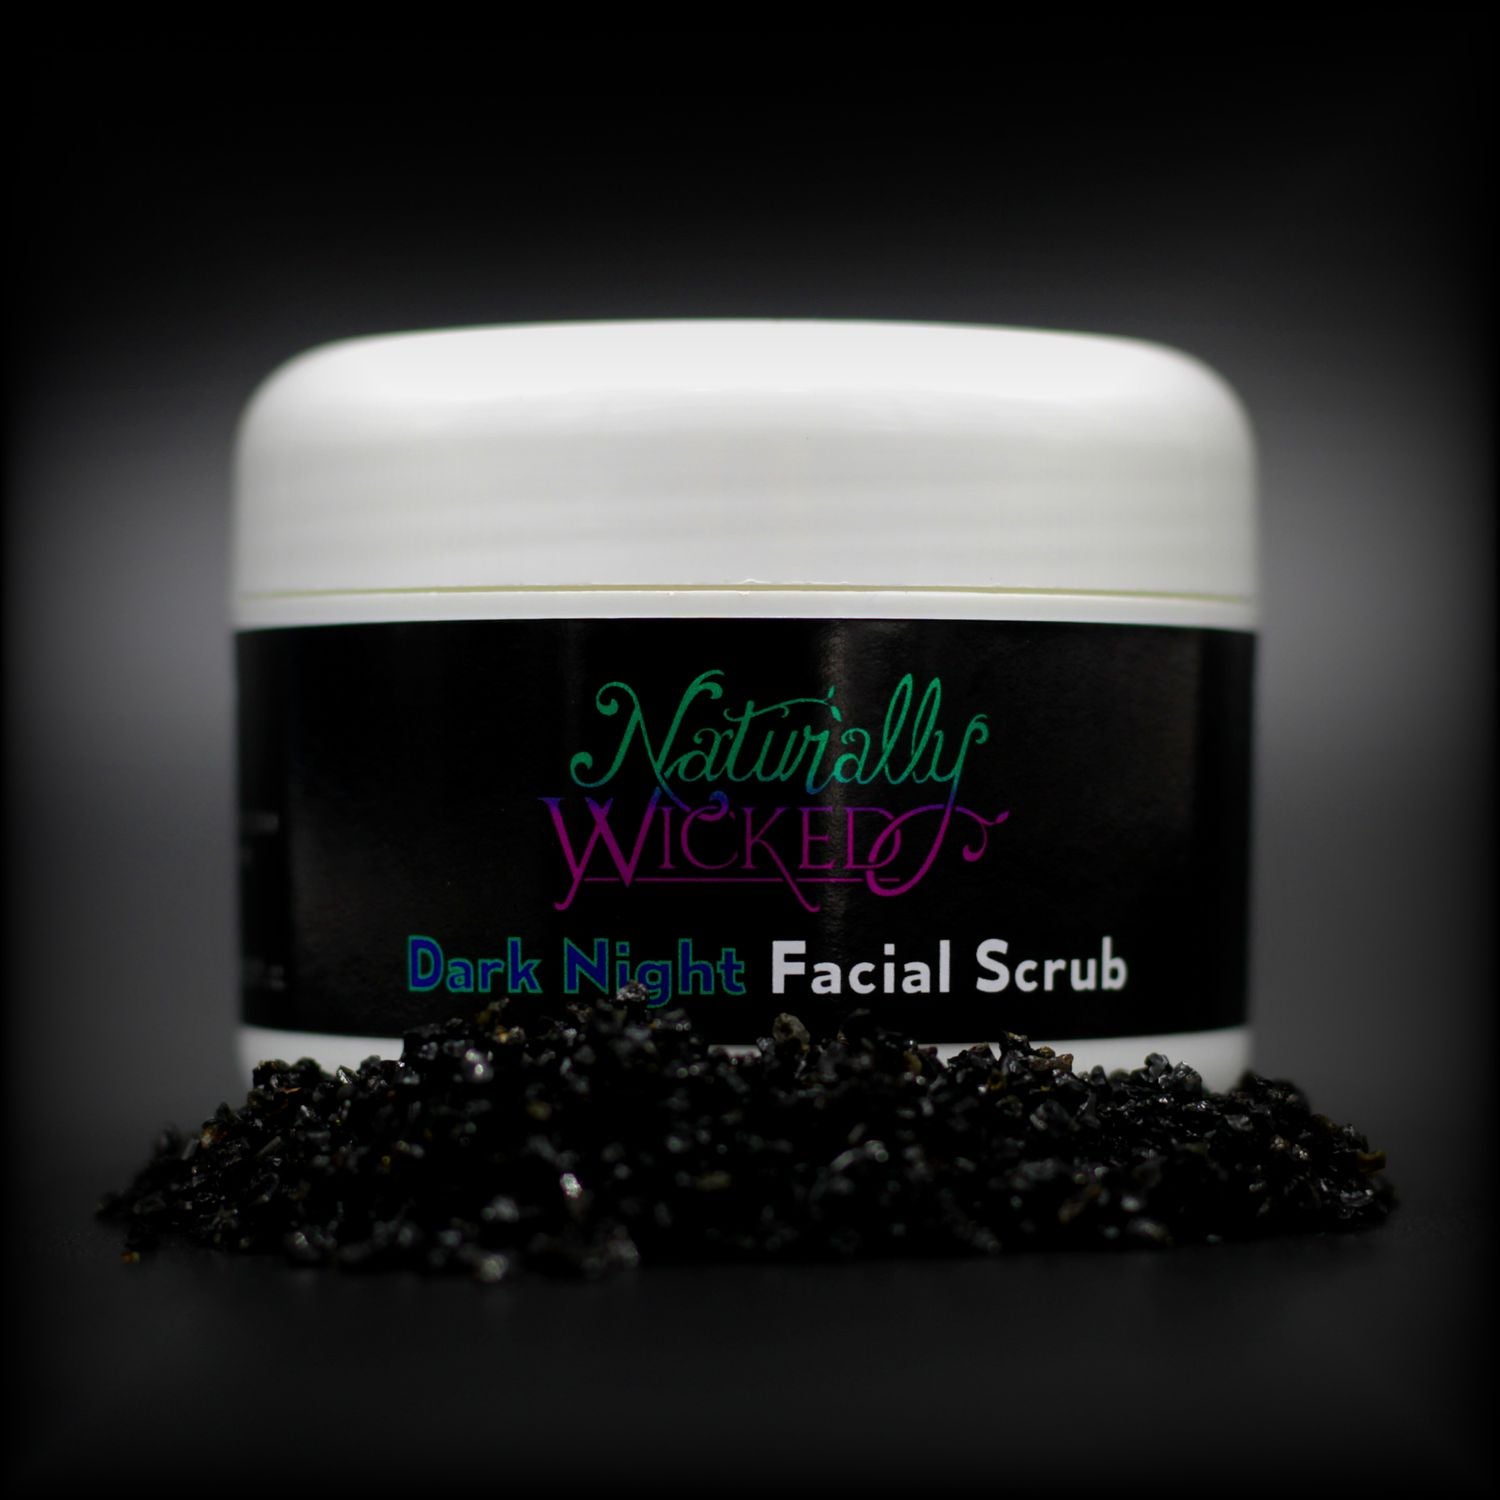 Naturally Wicked Dark Night Facial Scrub Surrounded By Absorbant Black Charcoal